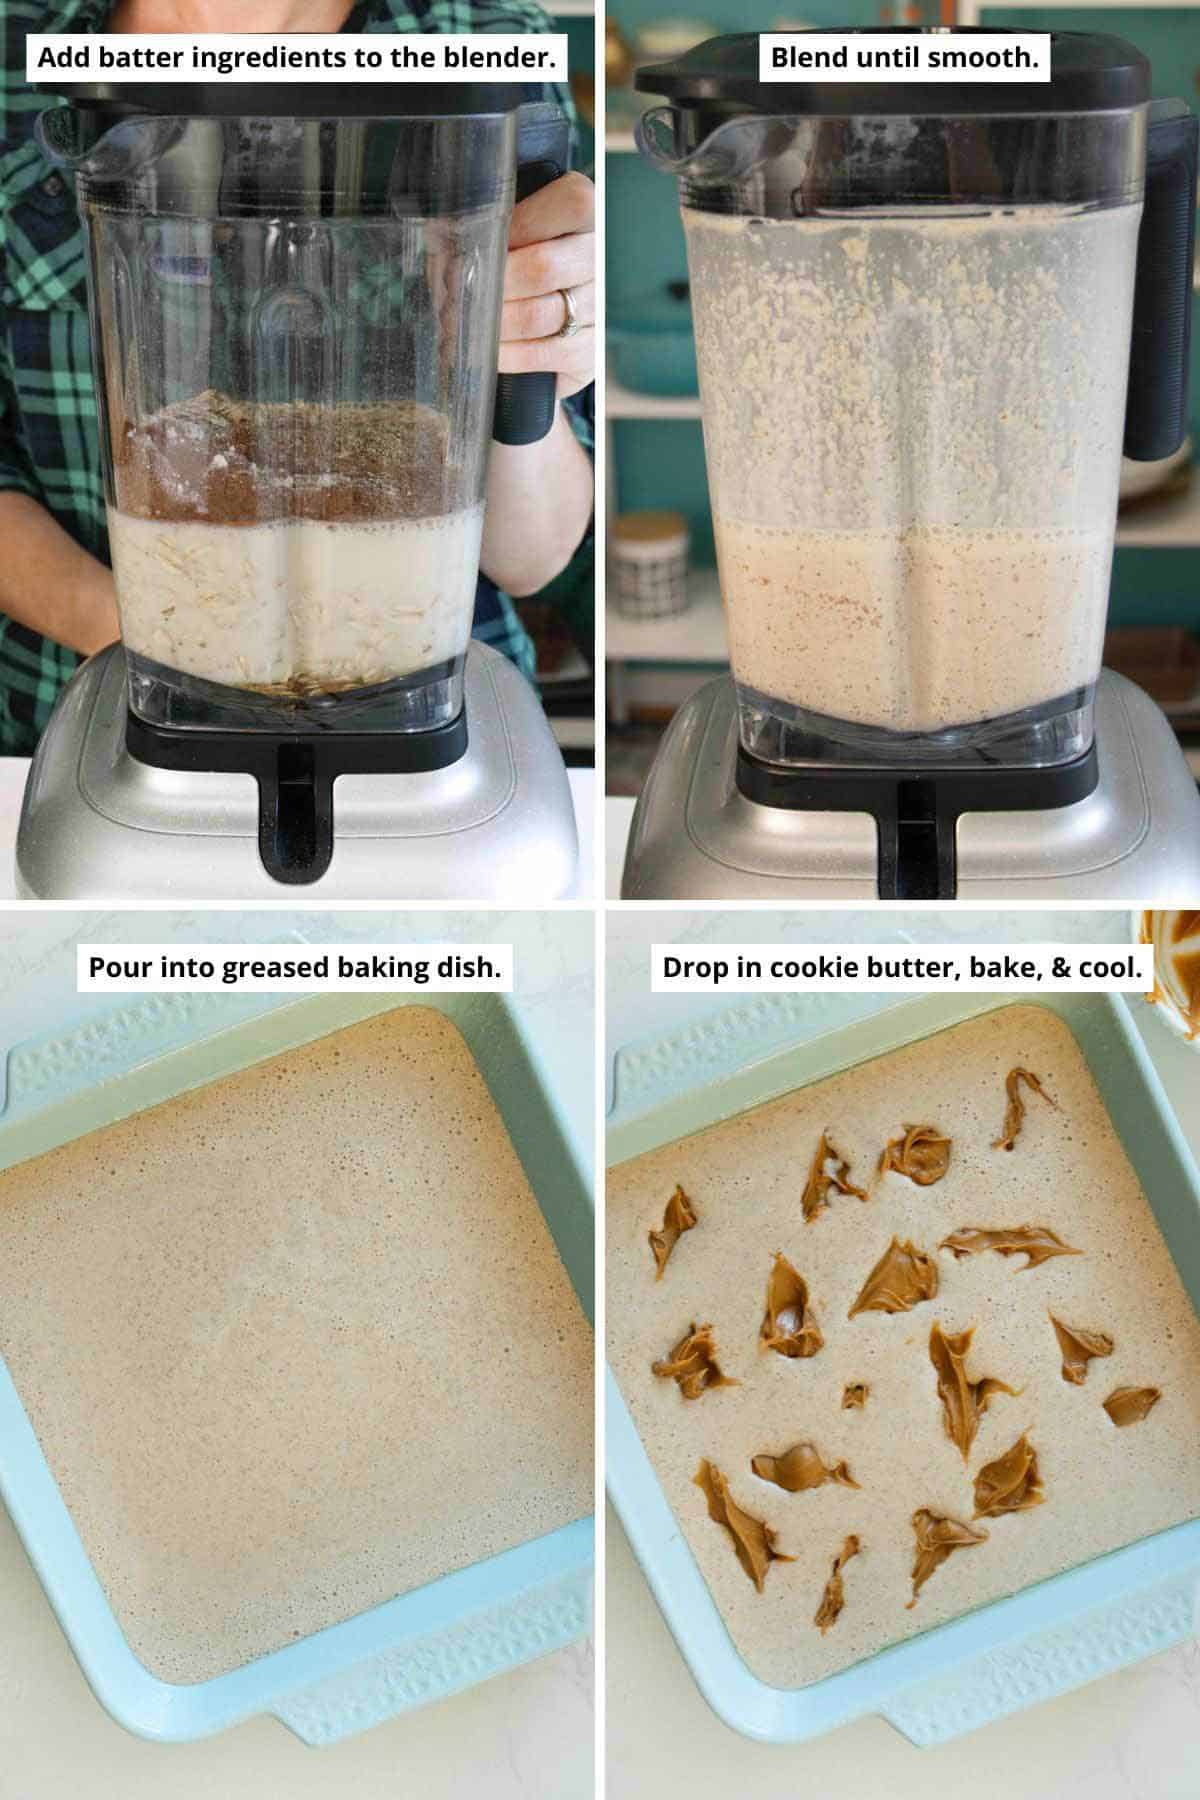 image collage showing the oat mixture in the blender before and after baking and in the pan before and after dropping in the cookie butter